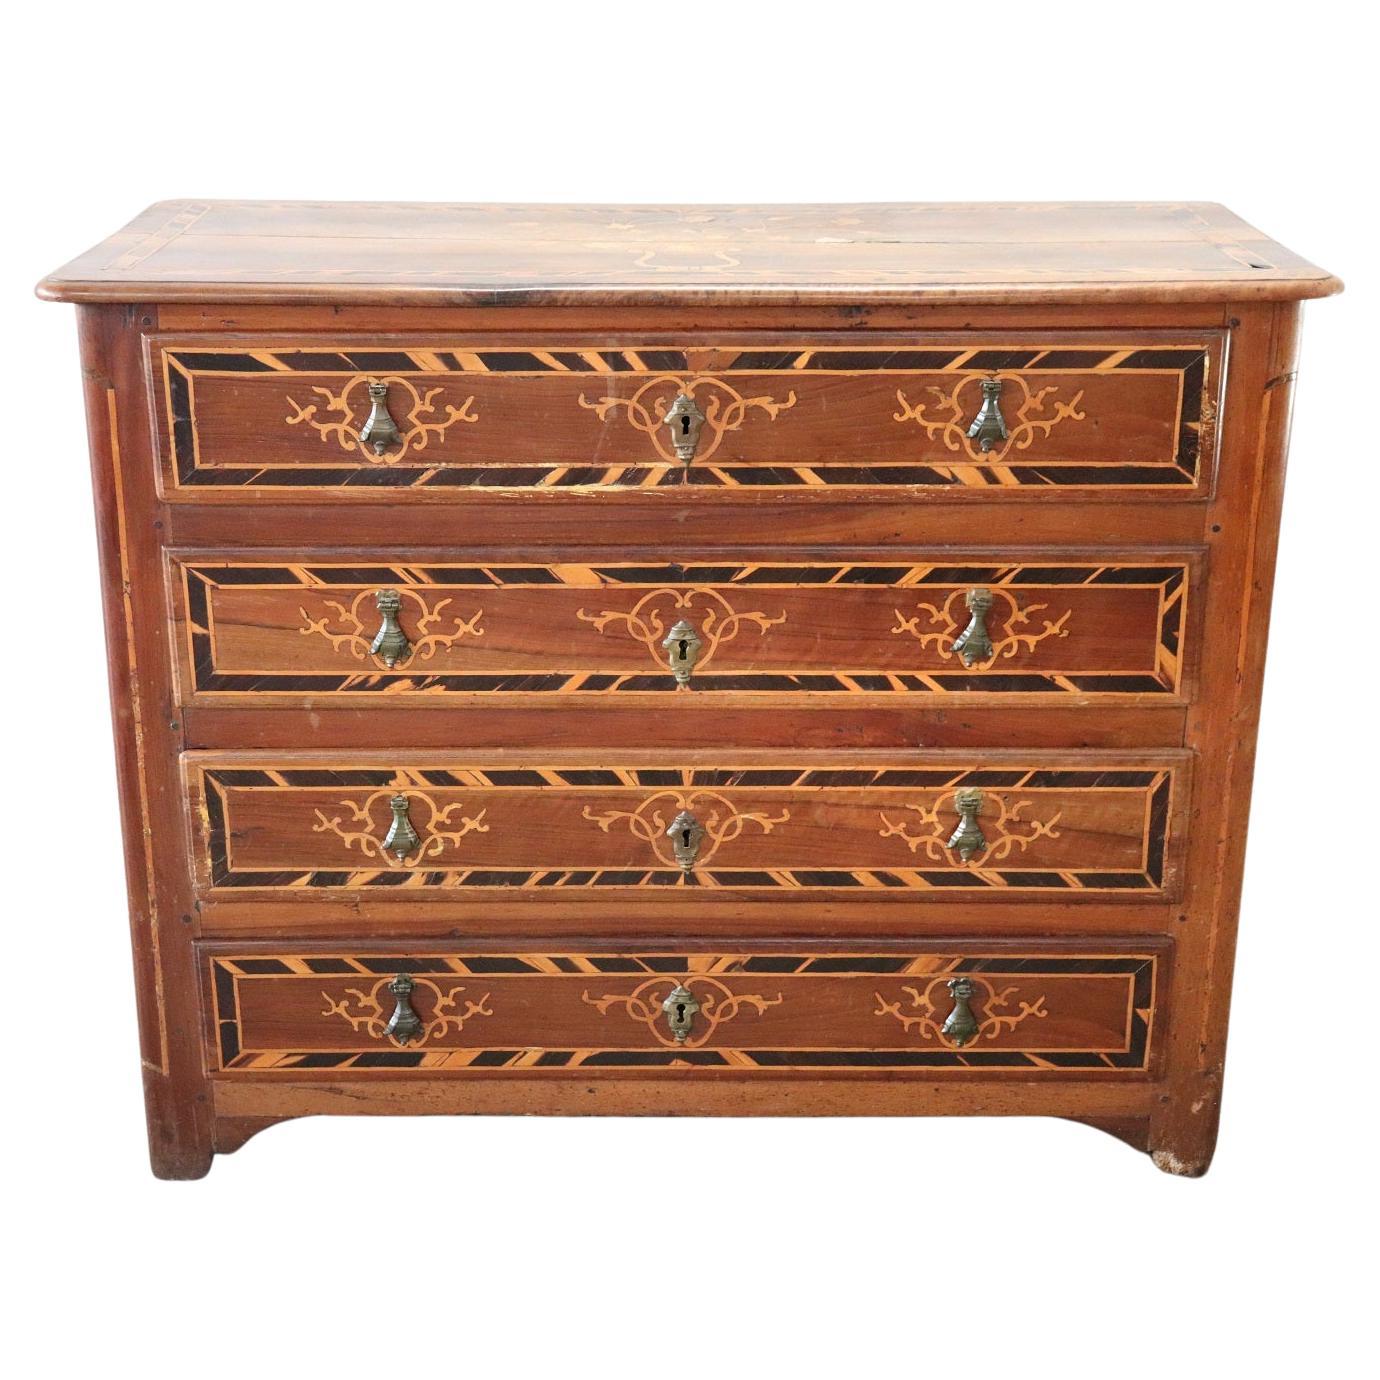 17th Century Italian Louis XIV Walnut Inlaid Antique Commode or Chest of Drawers For Sale